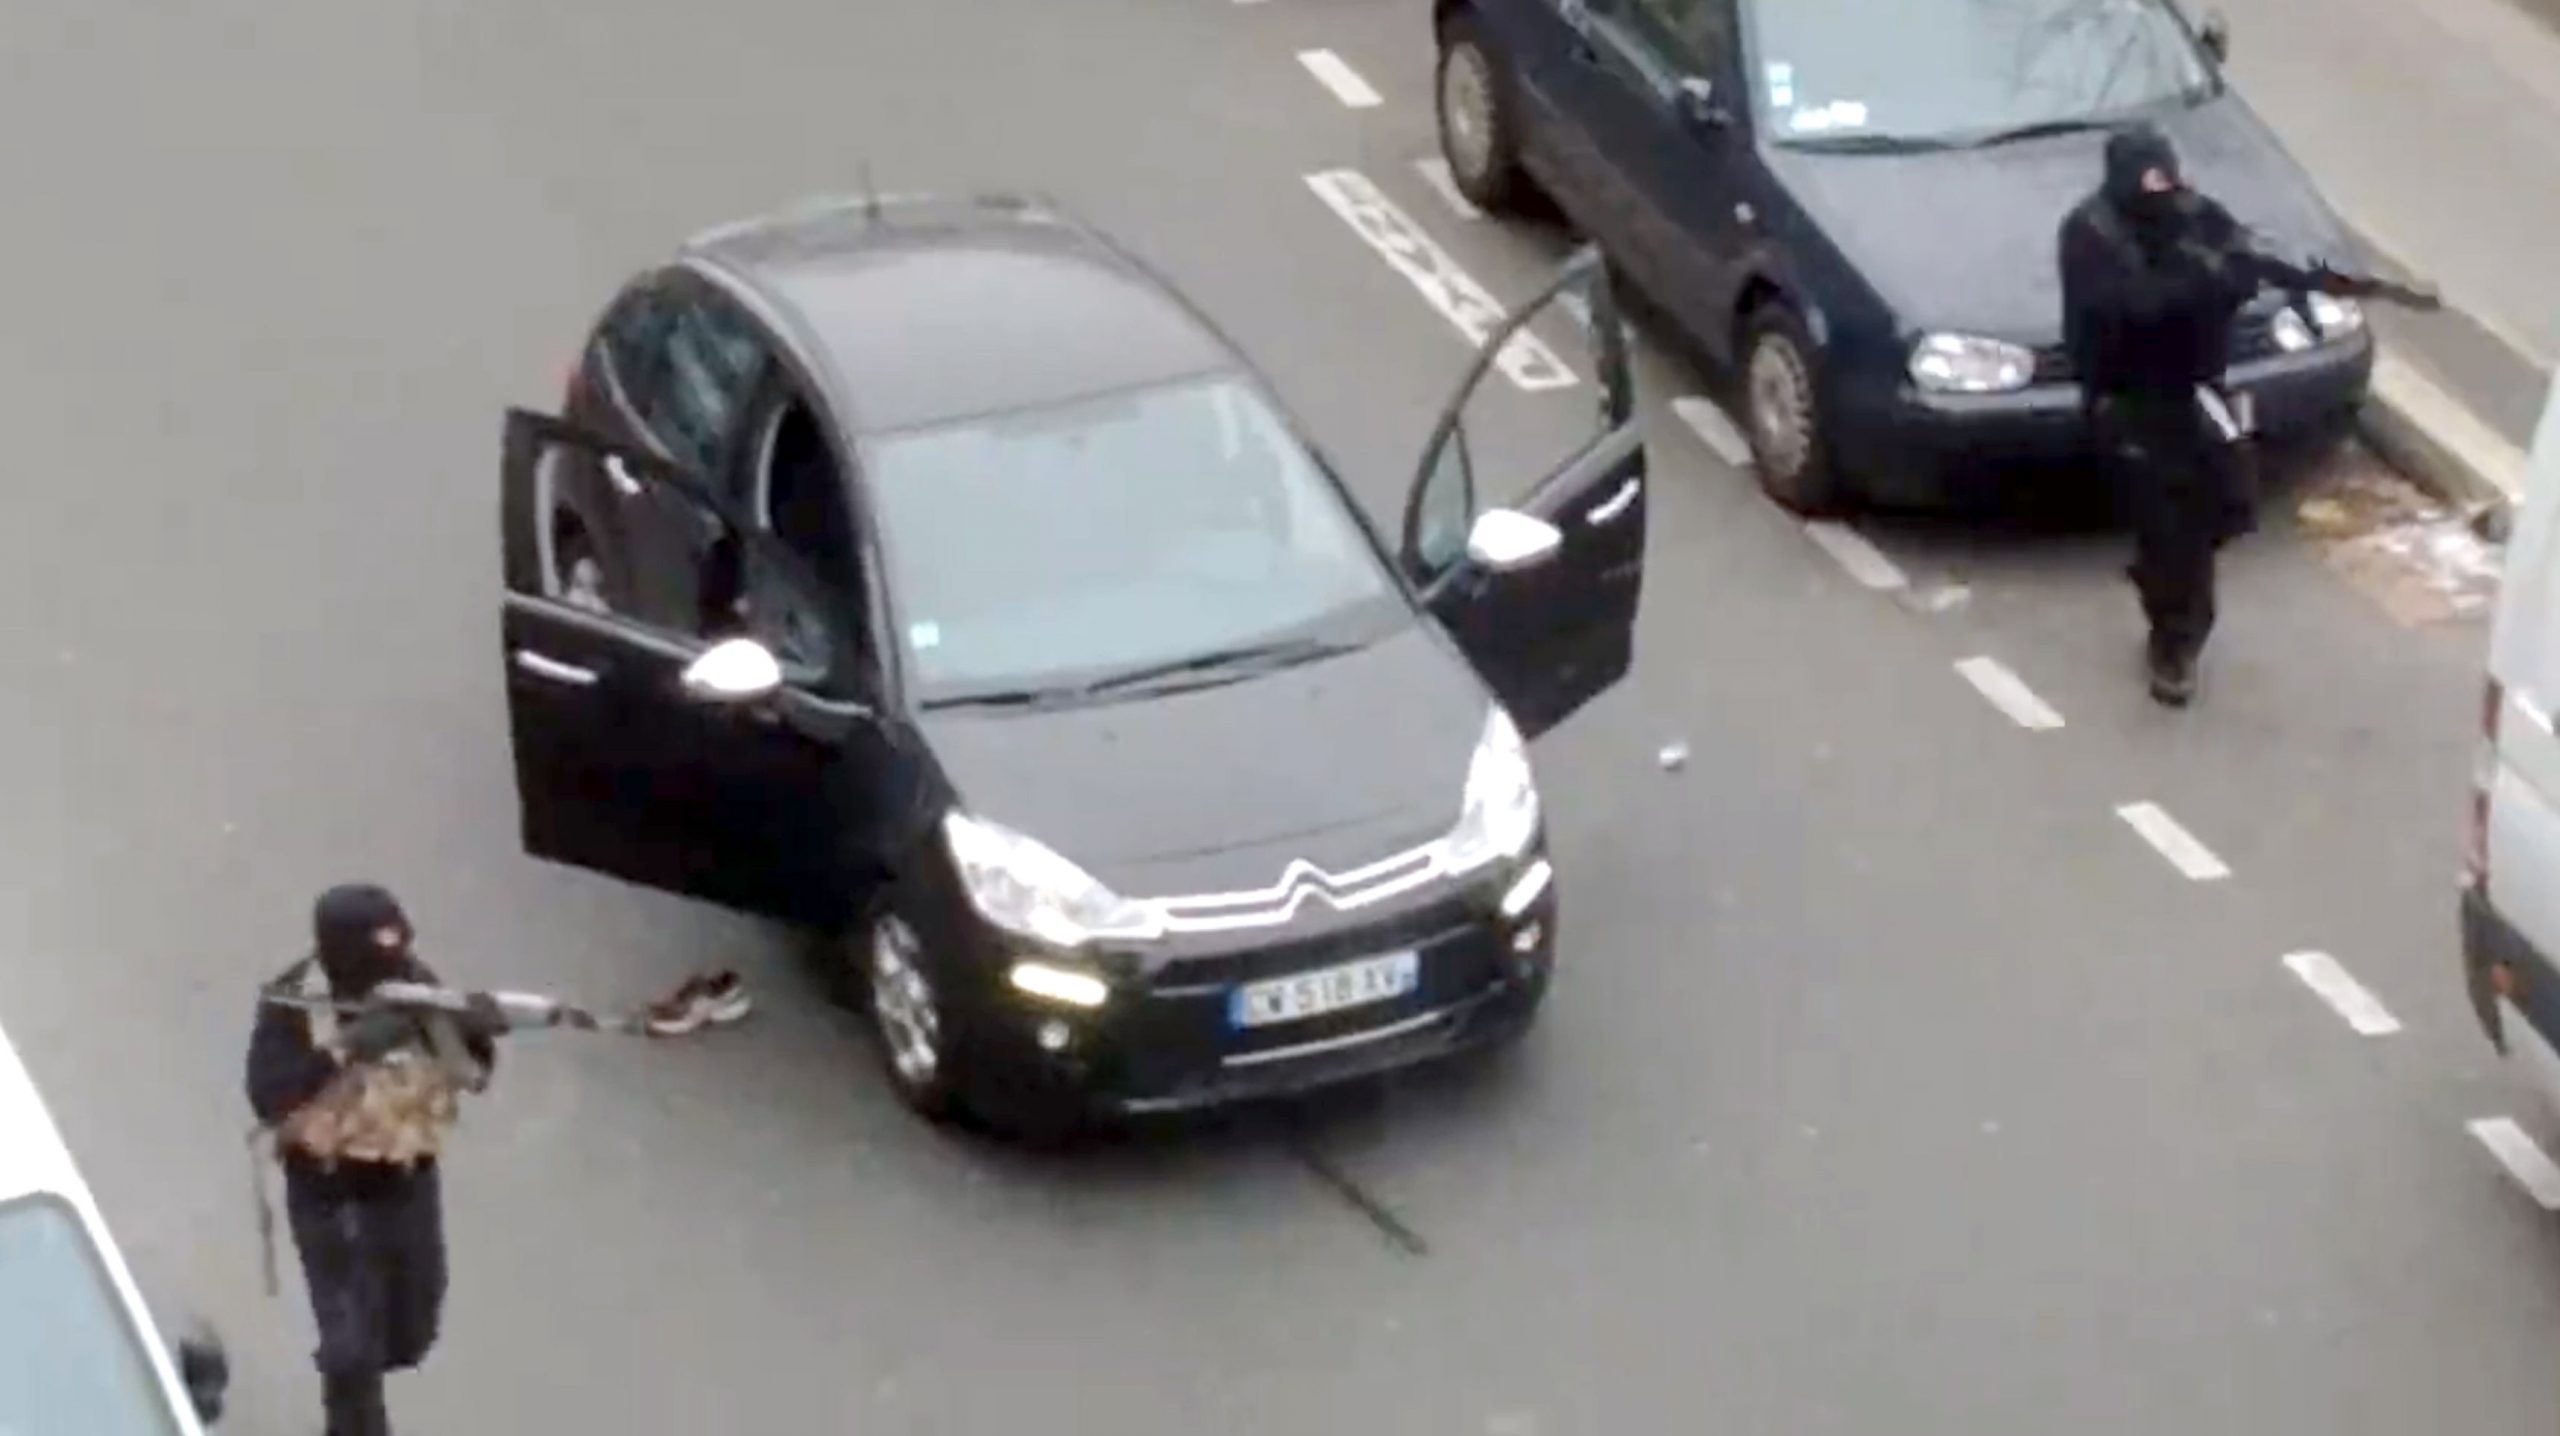 Trial begins in Charlie Hebdo terror attack that stunned France